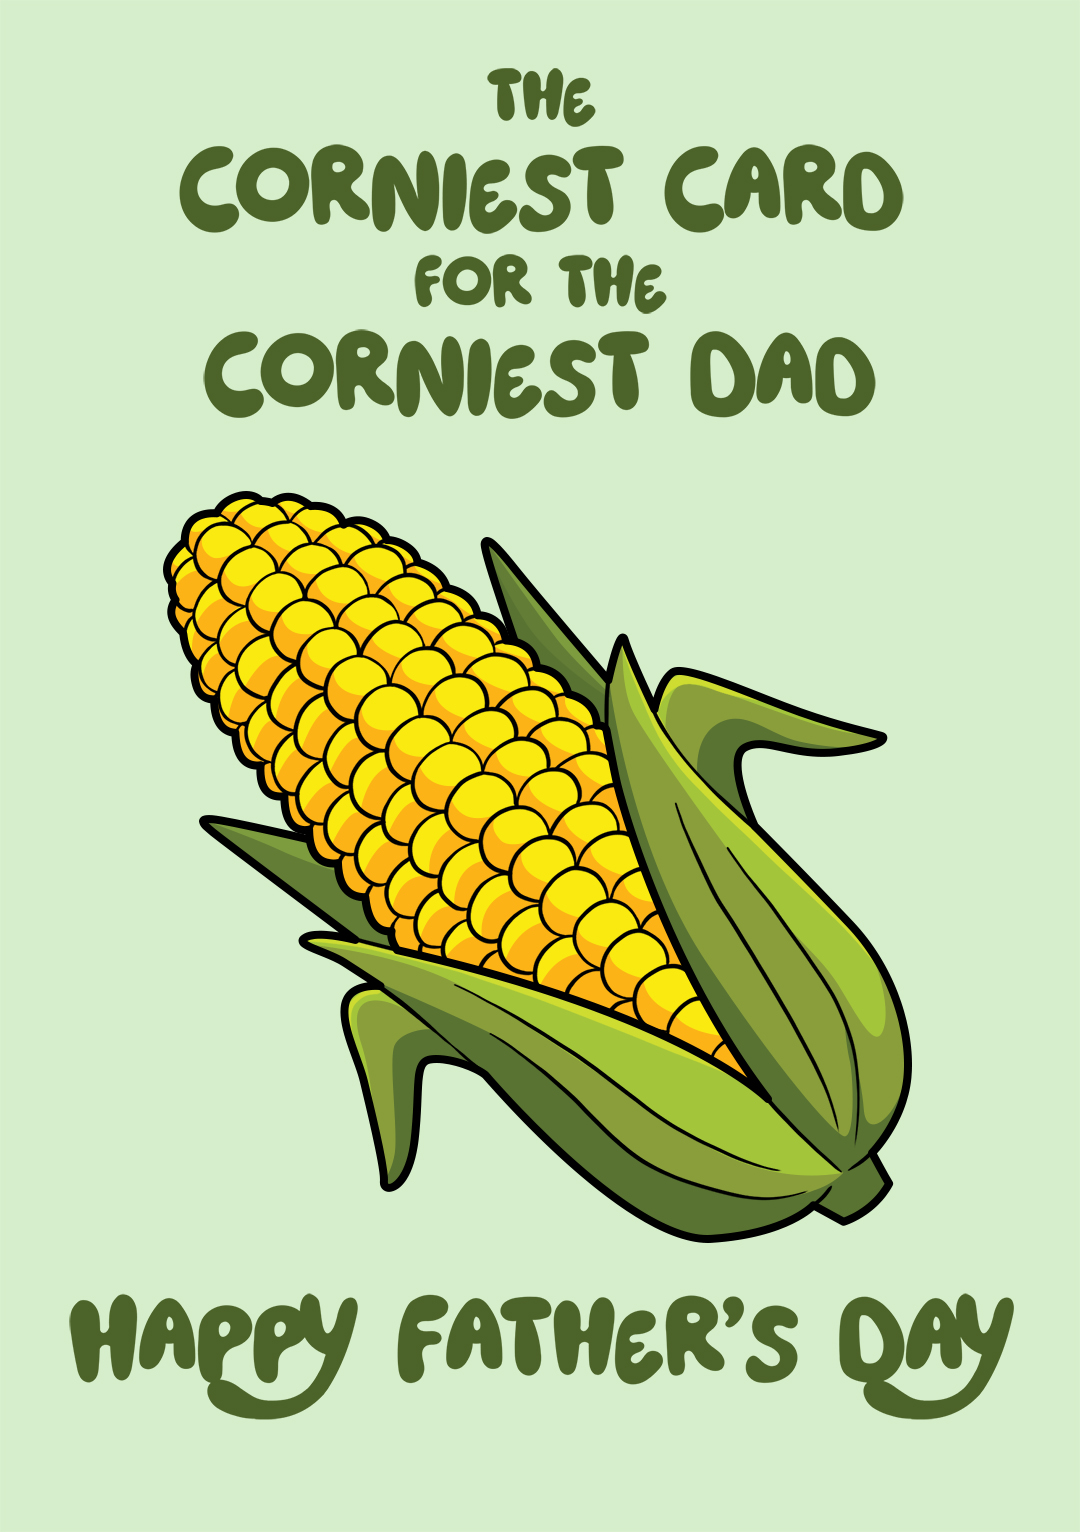 The Corniest Card For The Corniest Dad - Father's Day Card